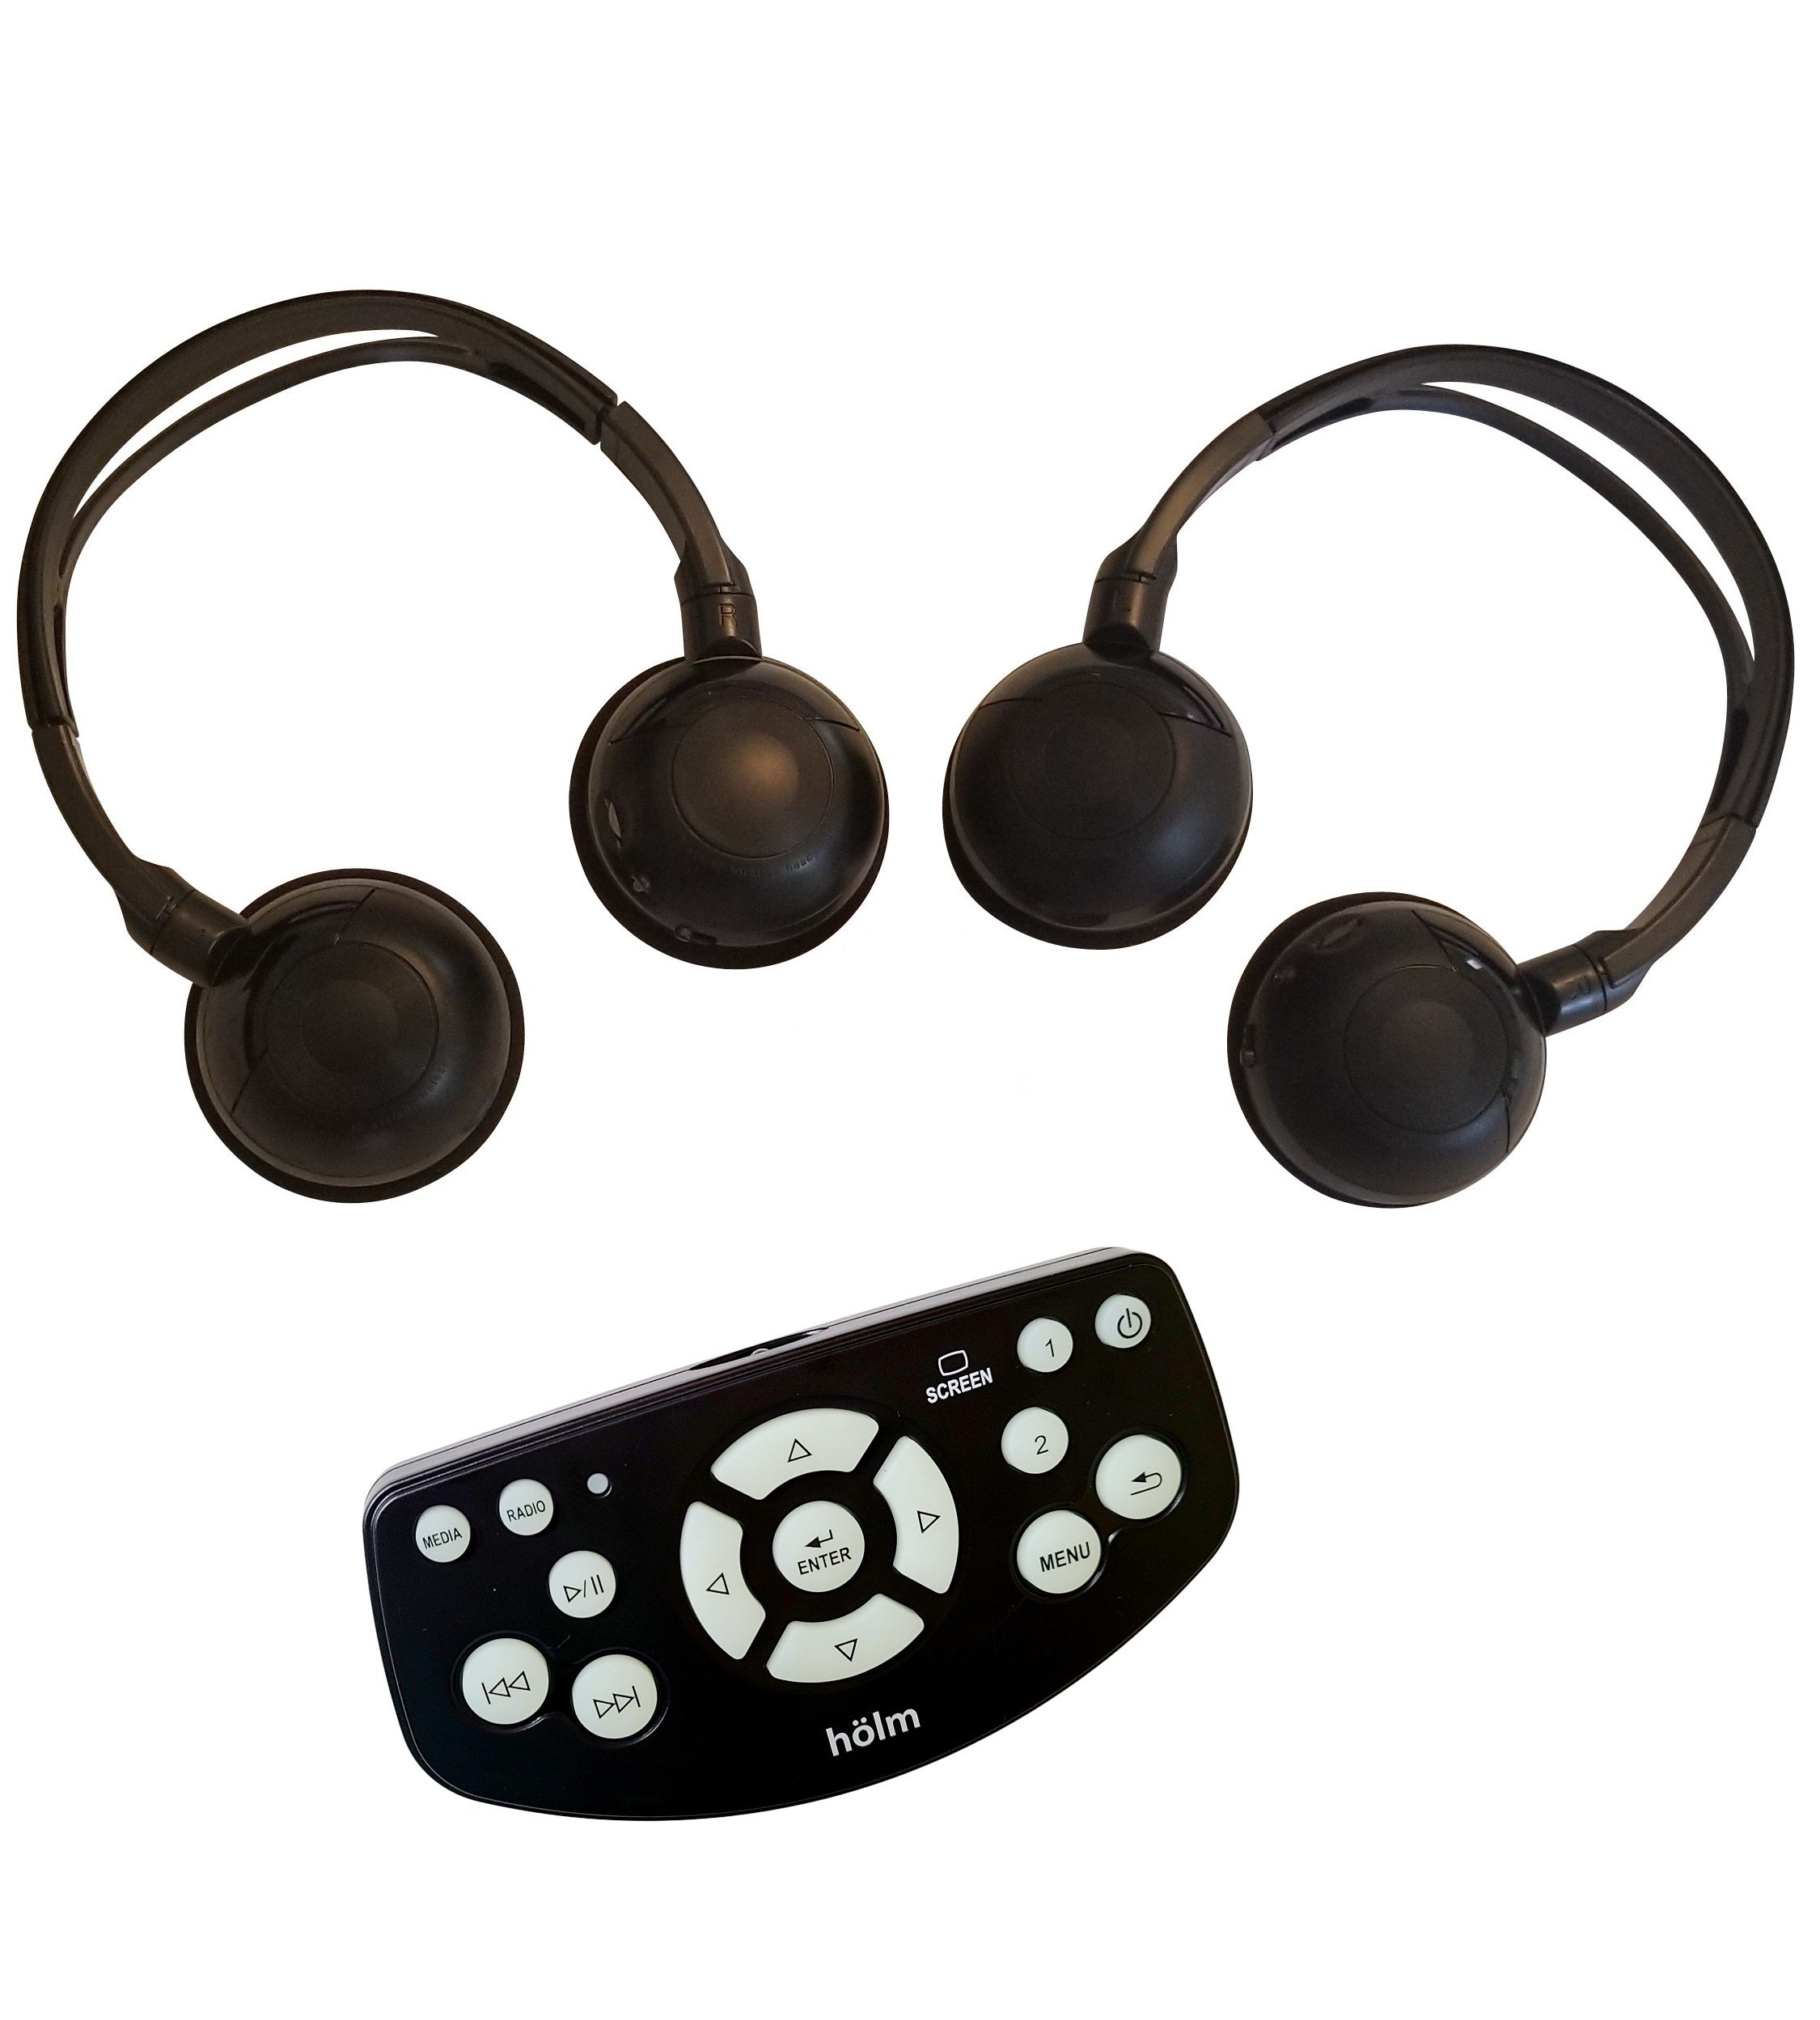 2014 Buick Lacrosse BluRay DVD Remote And Wireless Headphones